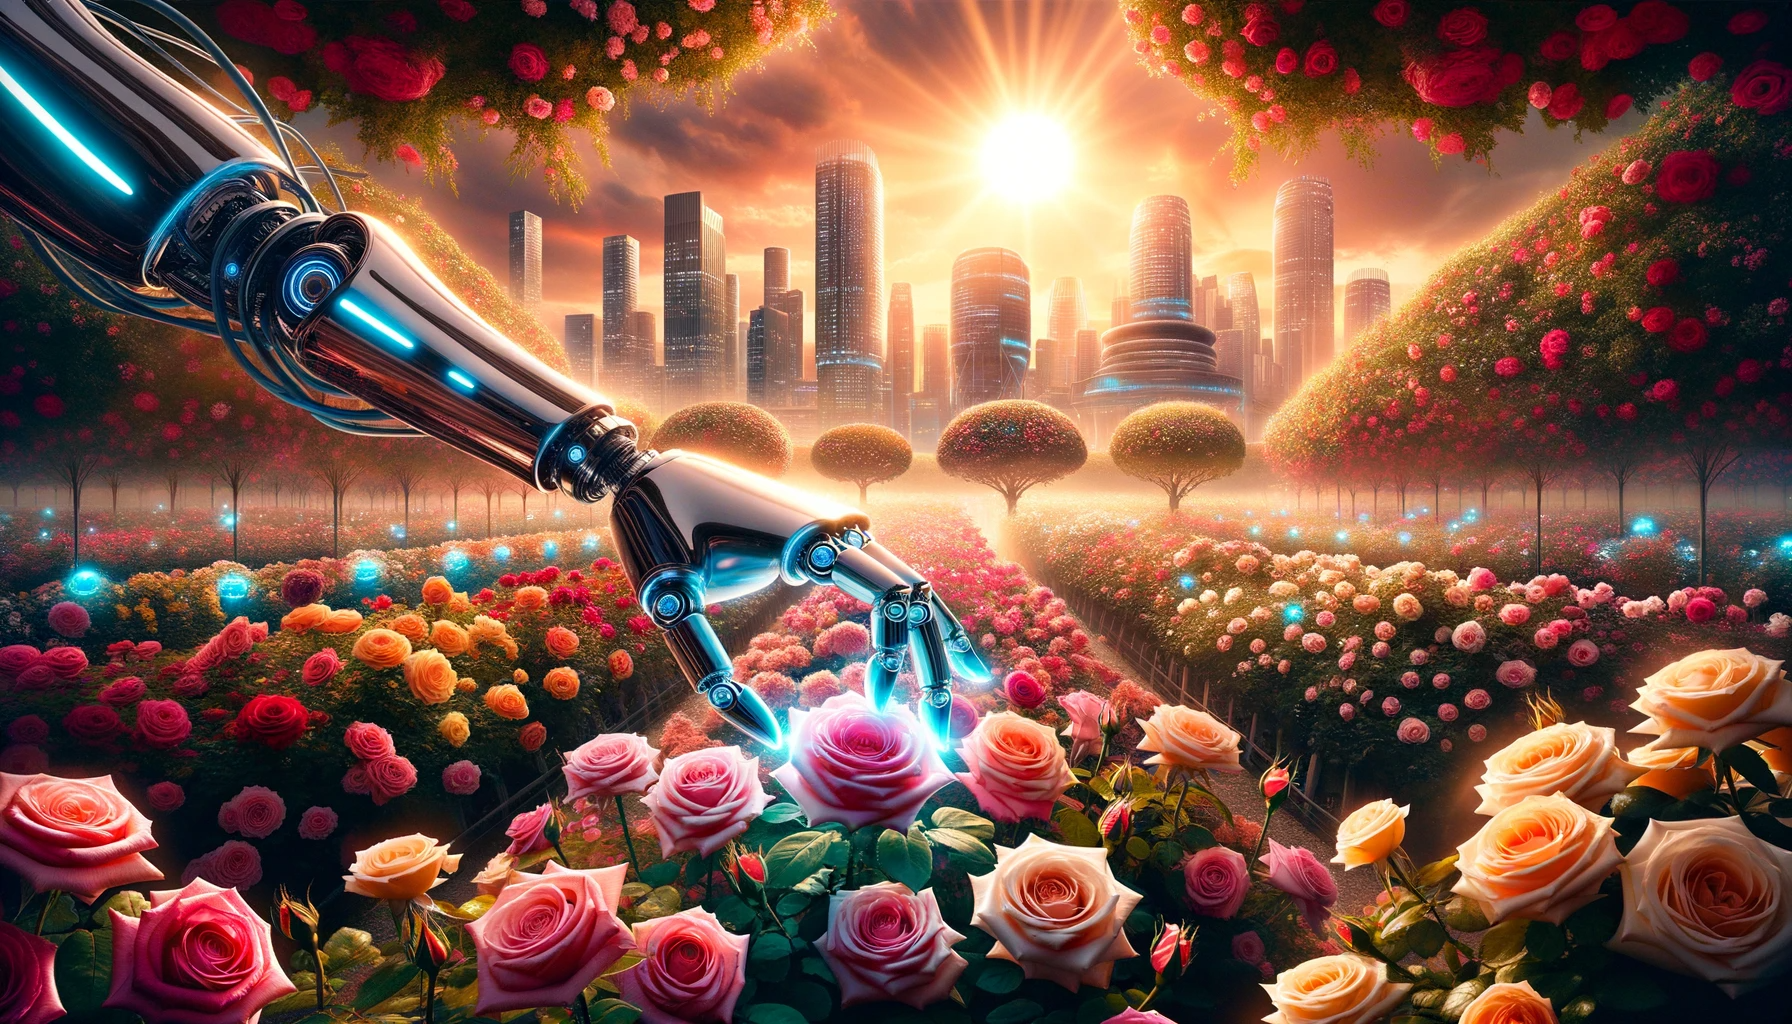 "Everything's coming up AI roses" by Marcel Gagné, created using DALL-E3. 